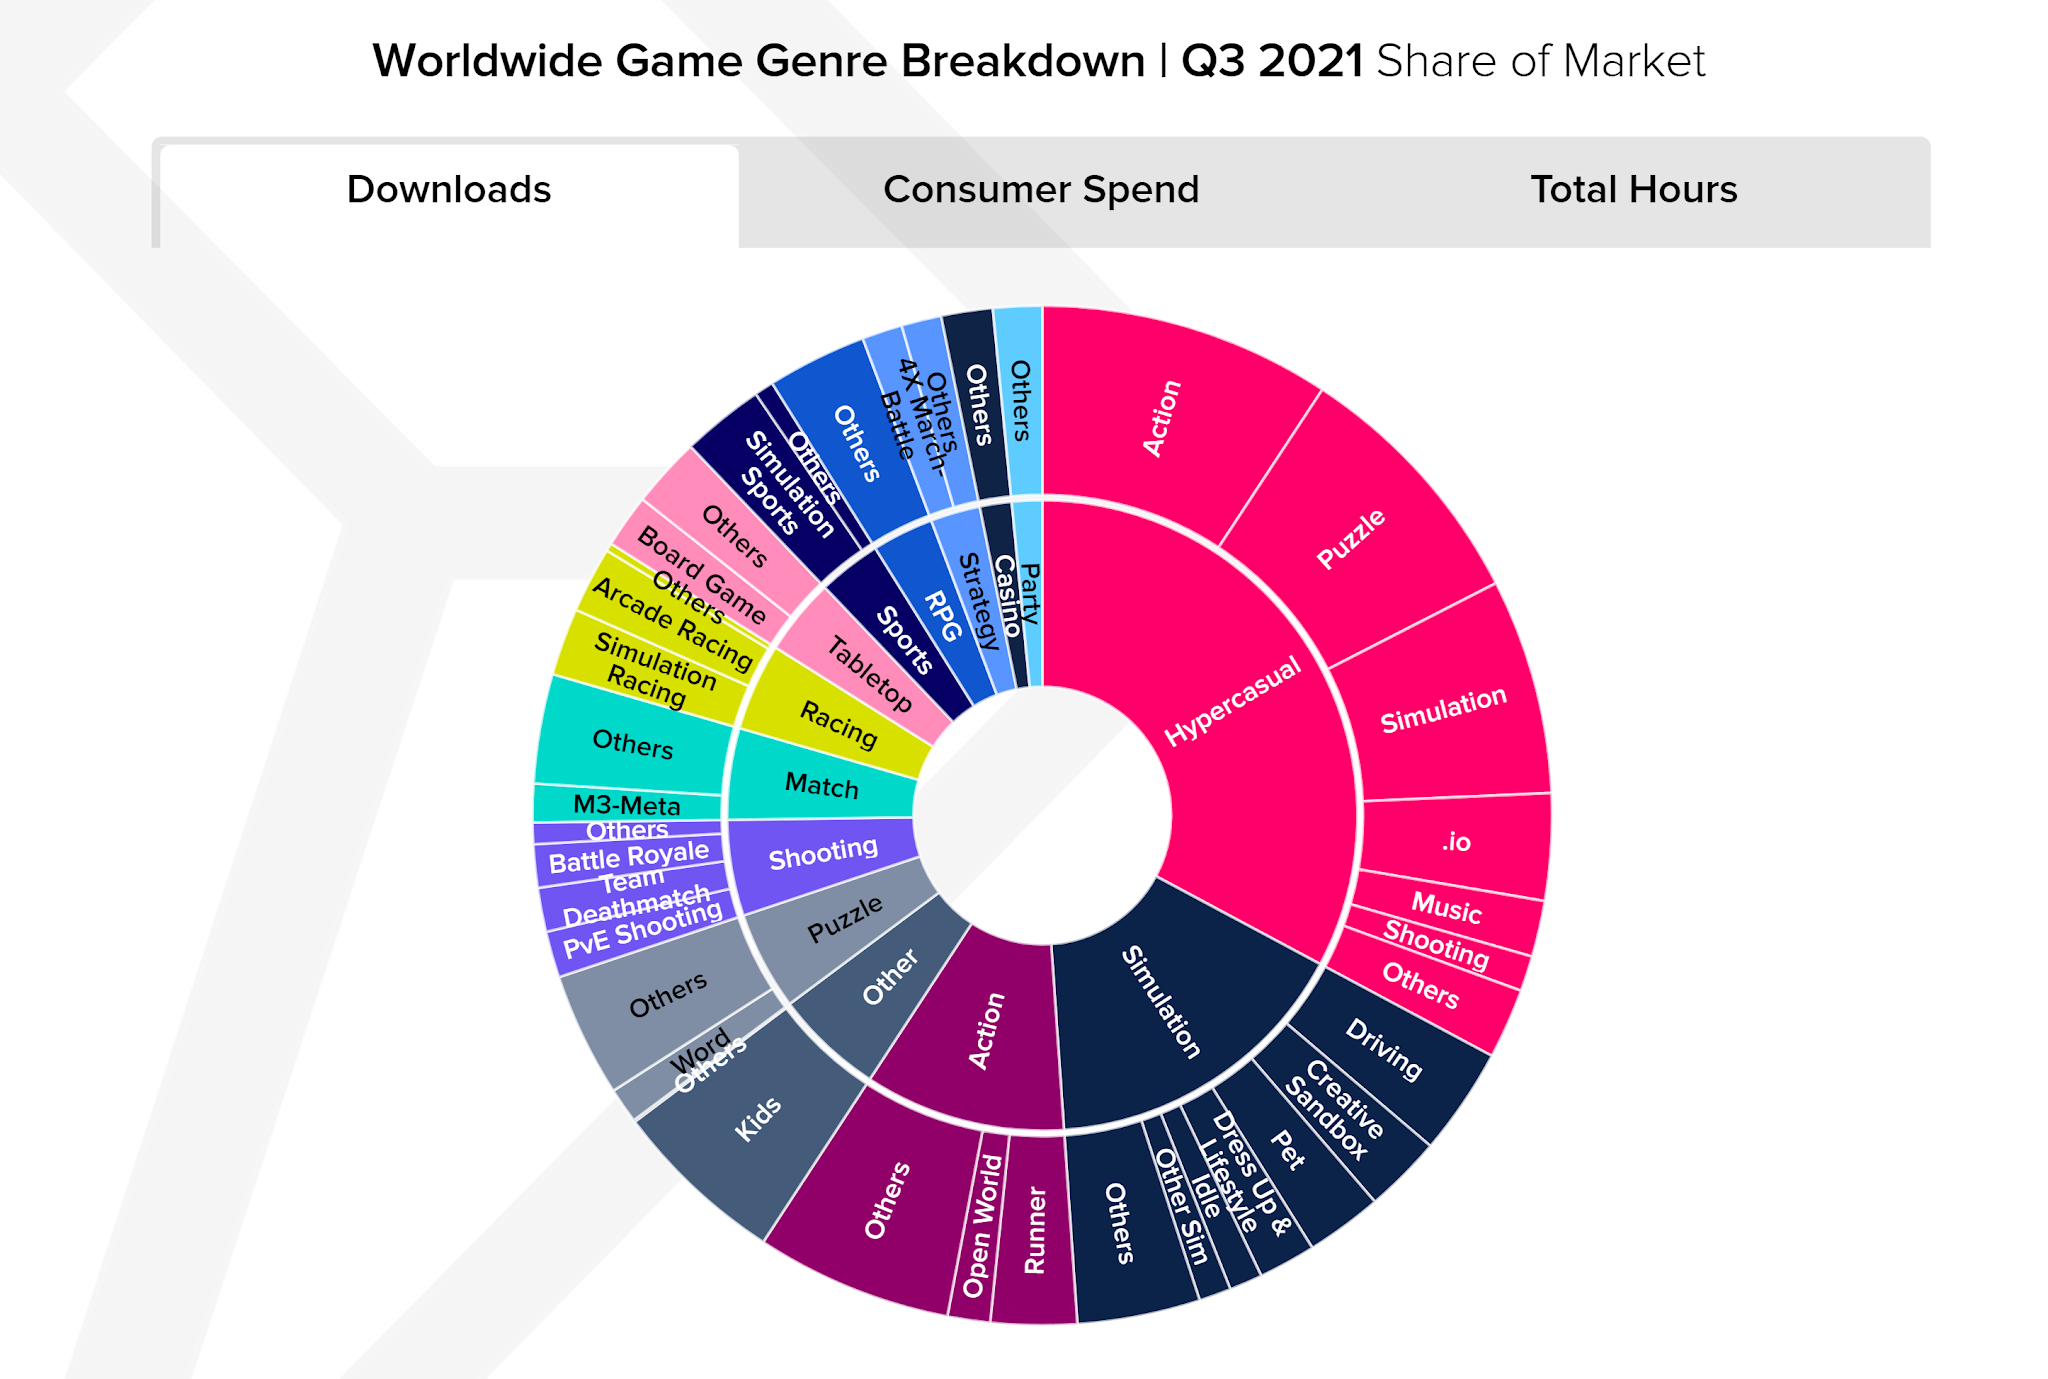 Over Half of 2022 Gaming Revenue to Come From Hypercasual Game Apps